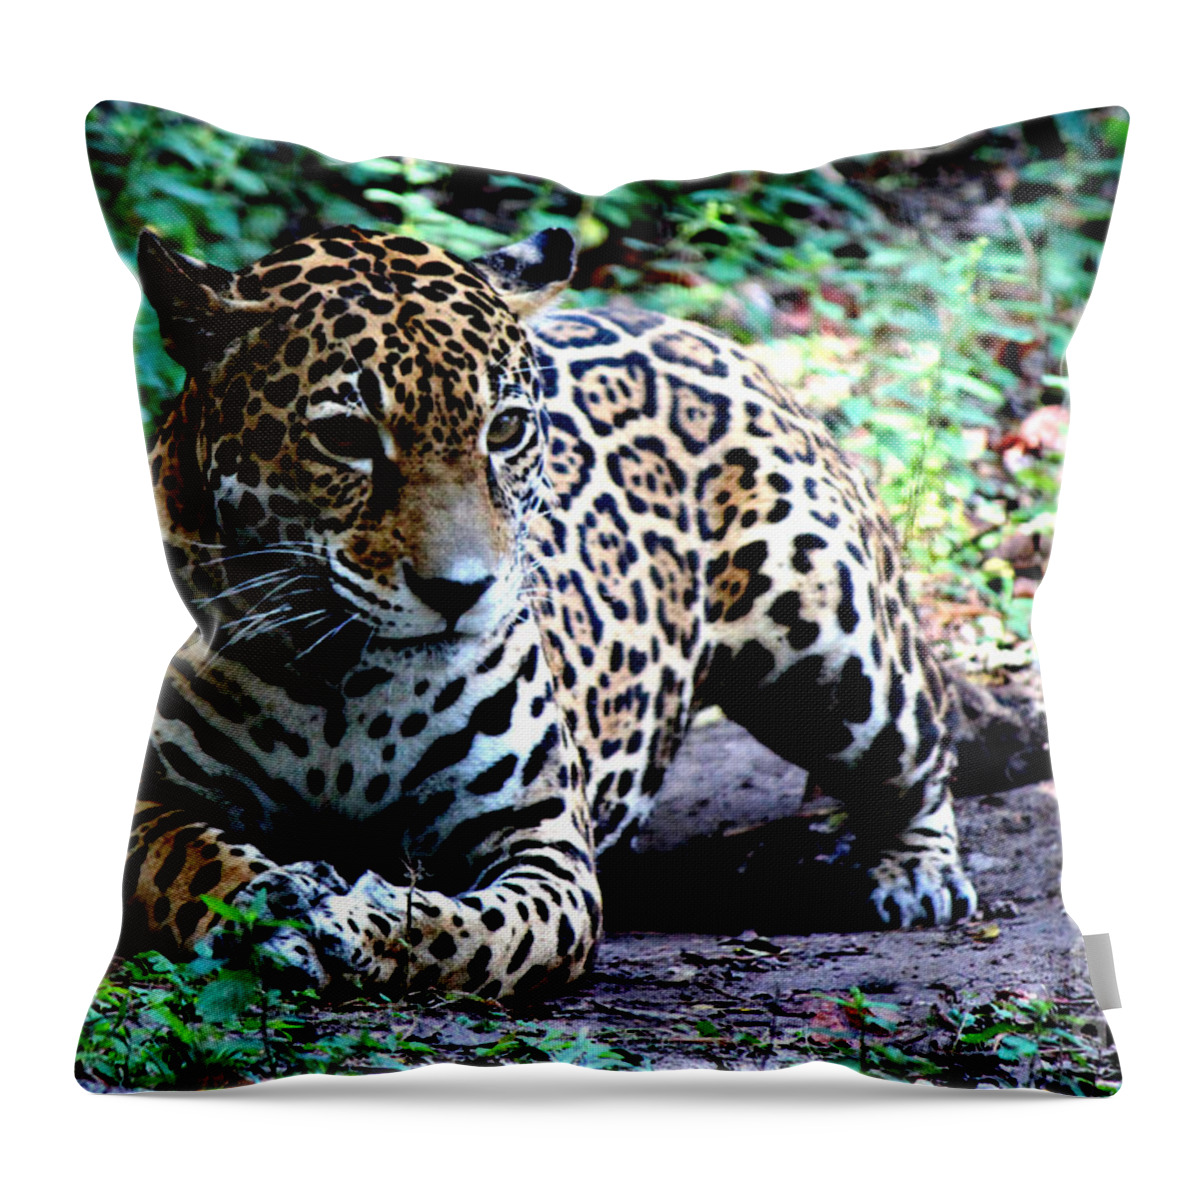 Jaguar Throw Pillow featuring the photograph Jaguar Crouching by Kathy White